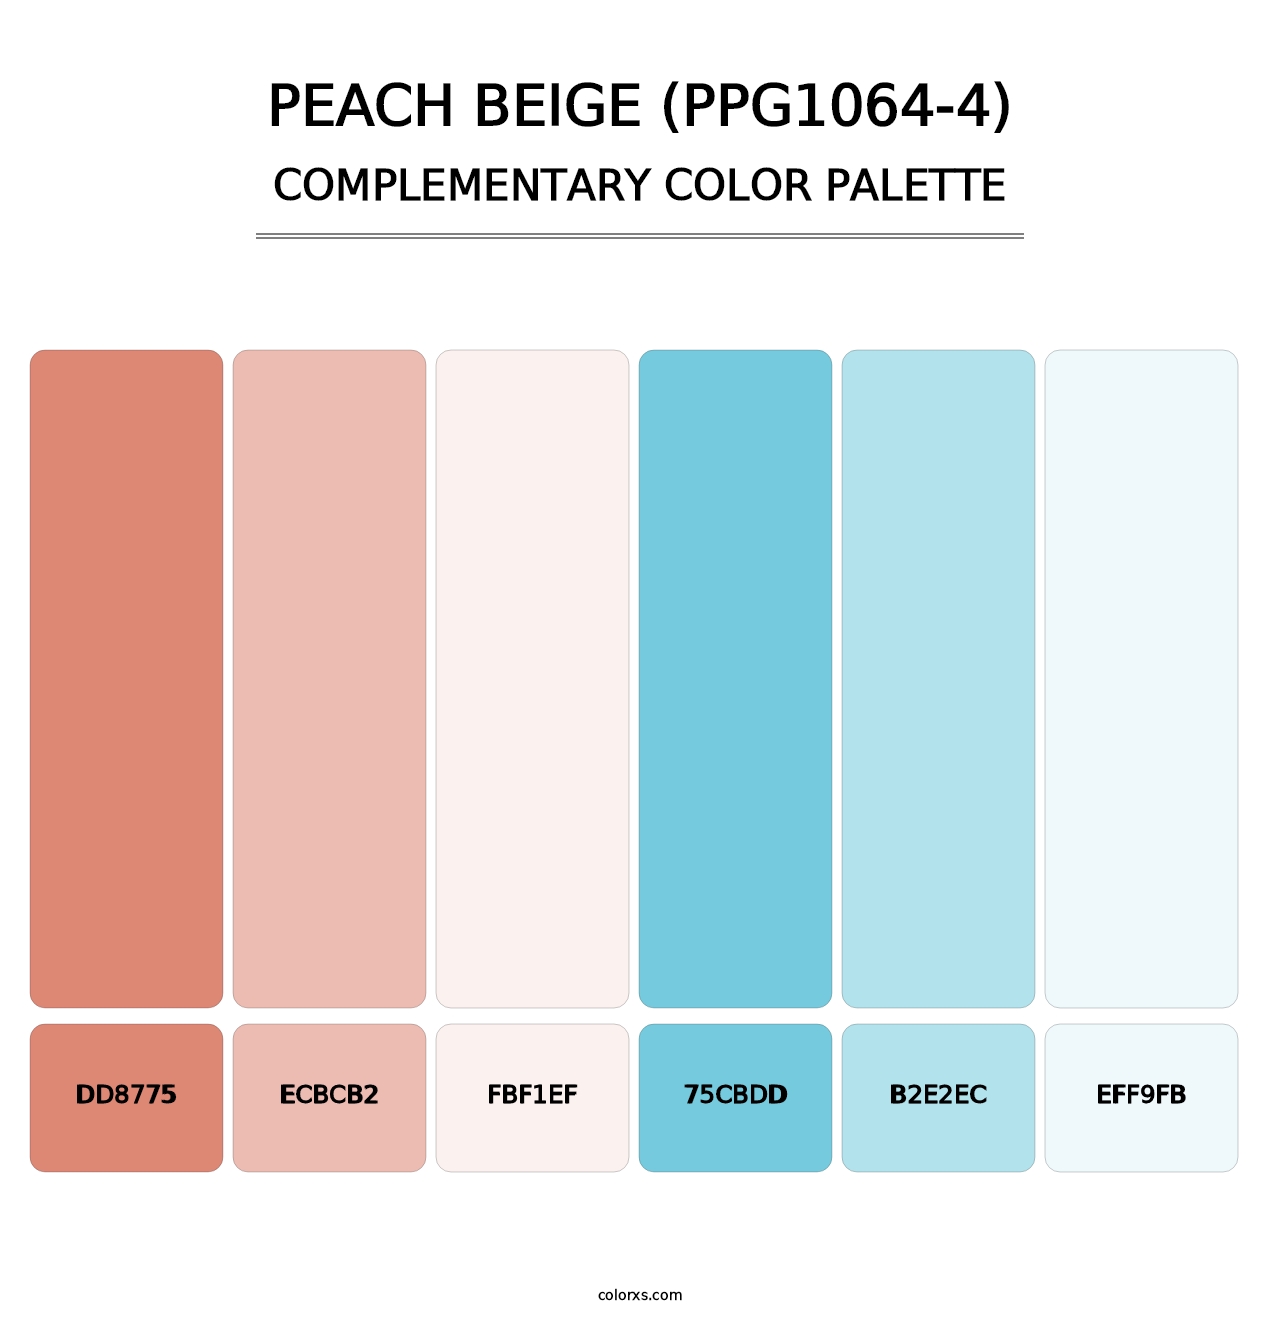 Peach Beige (PPG1064-4) - Complementary Color Palette